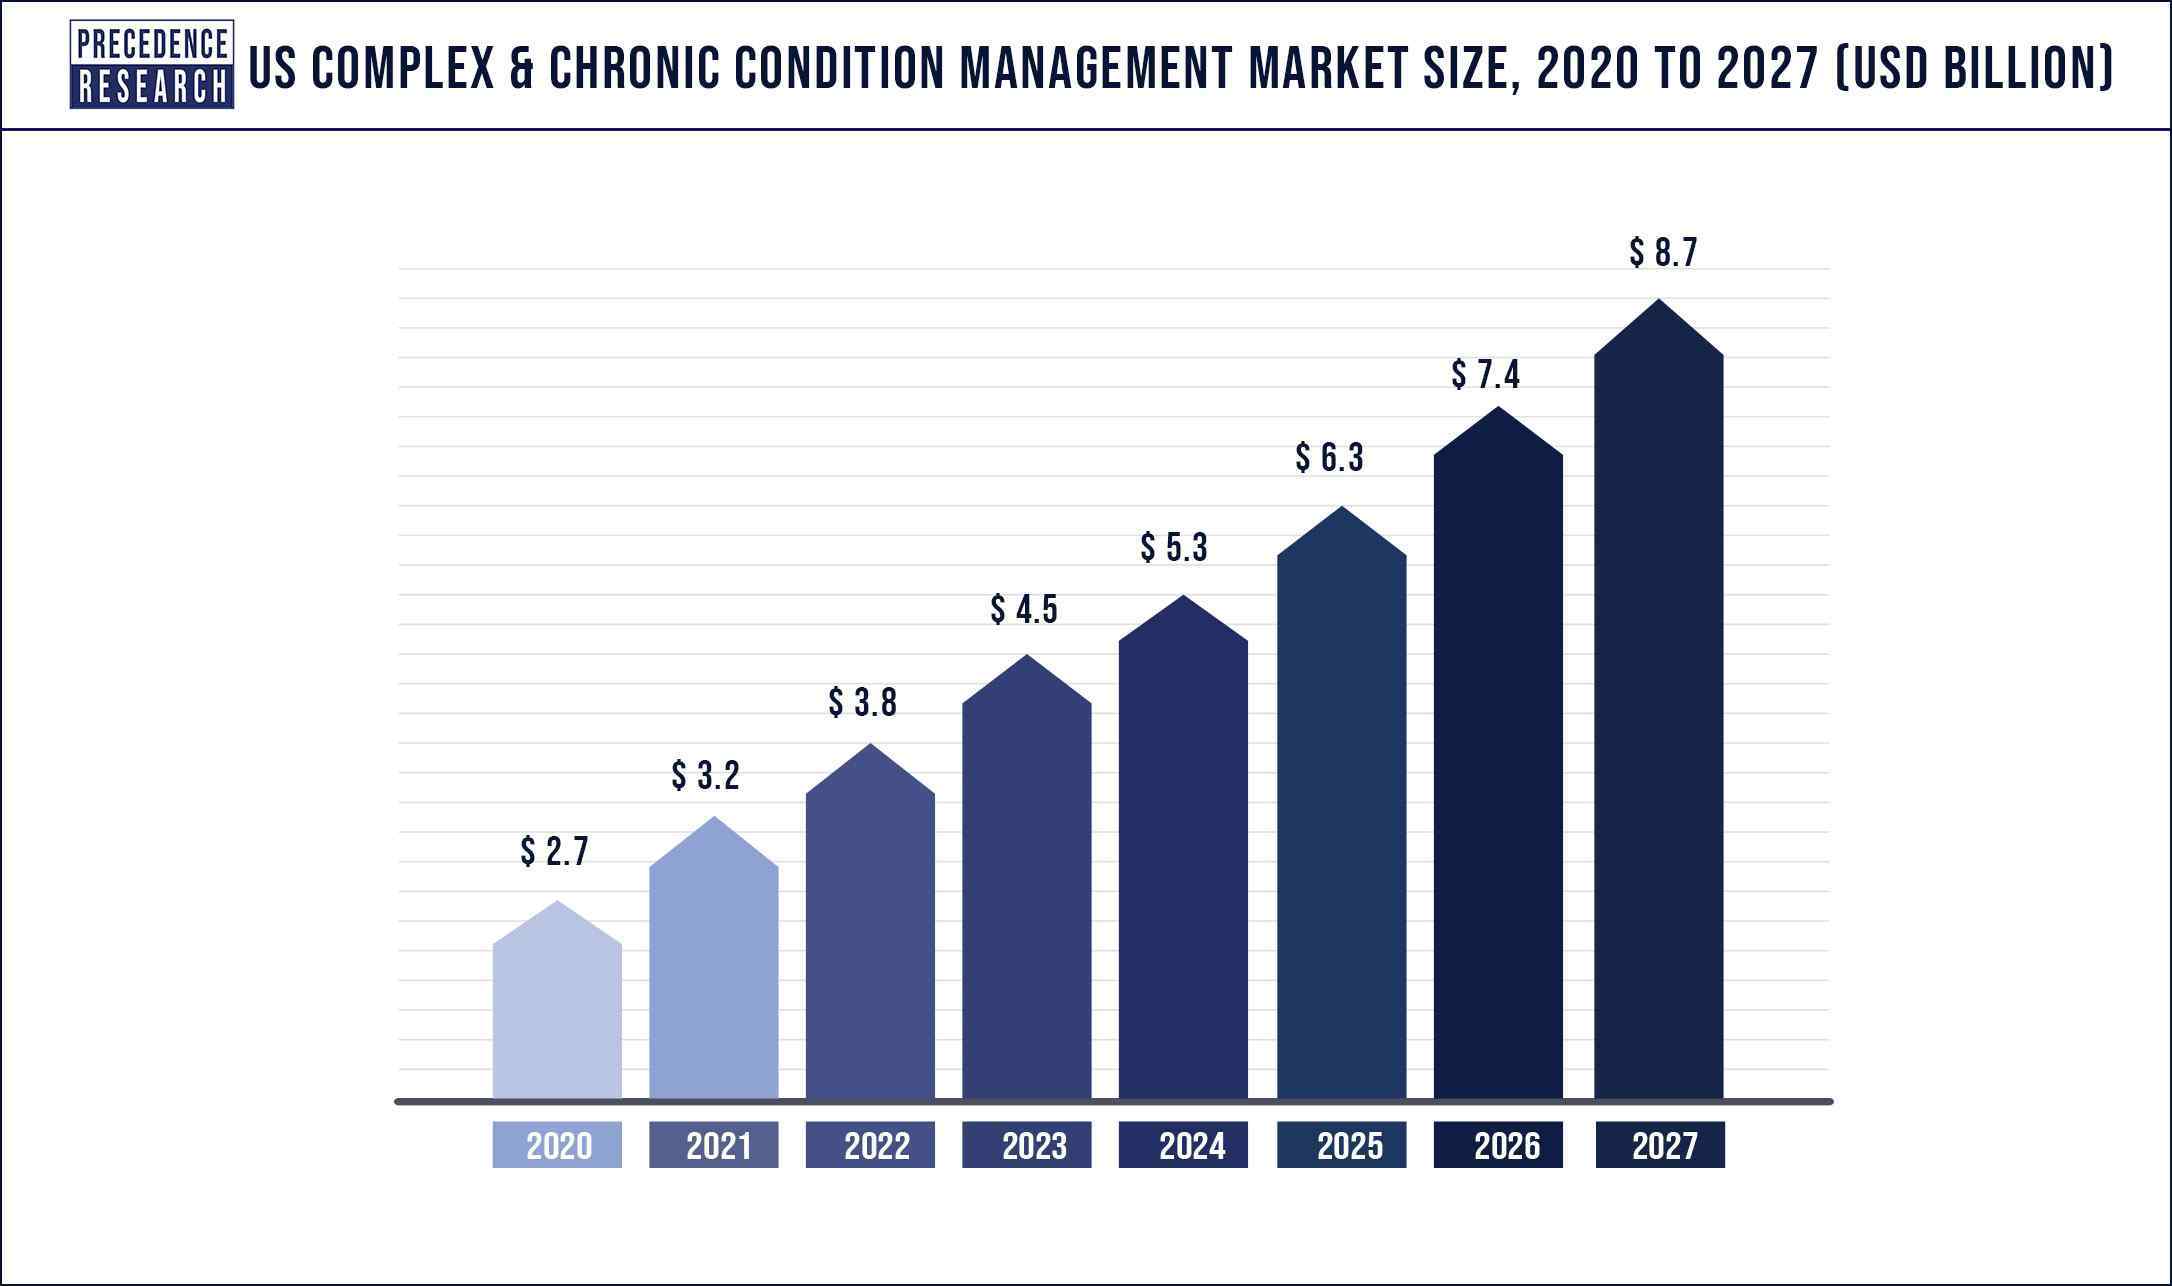 U.S. Complex and Chronic Condition Management Market Size 2020 to 2030